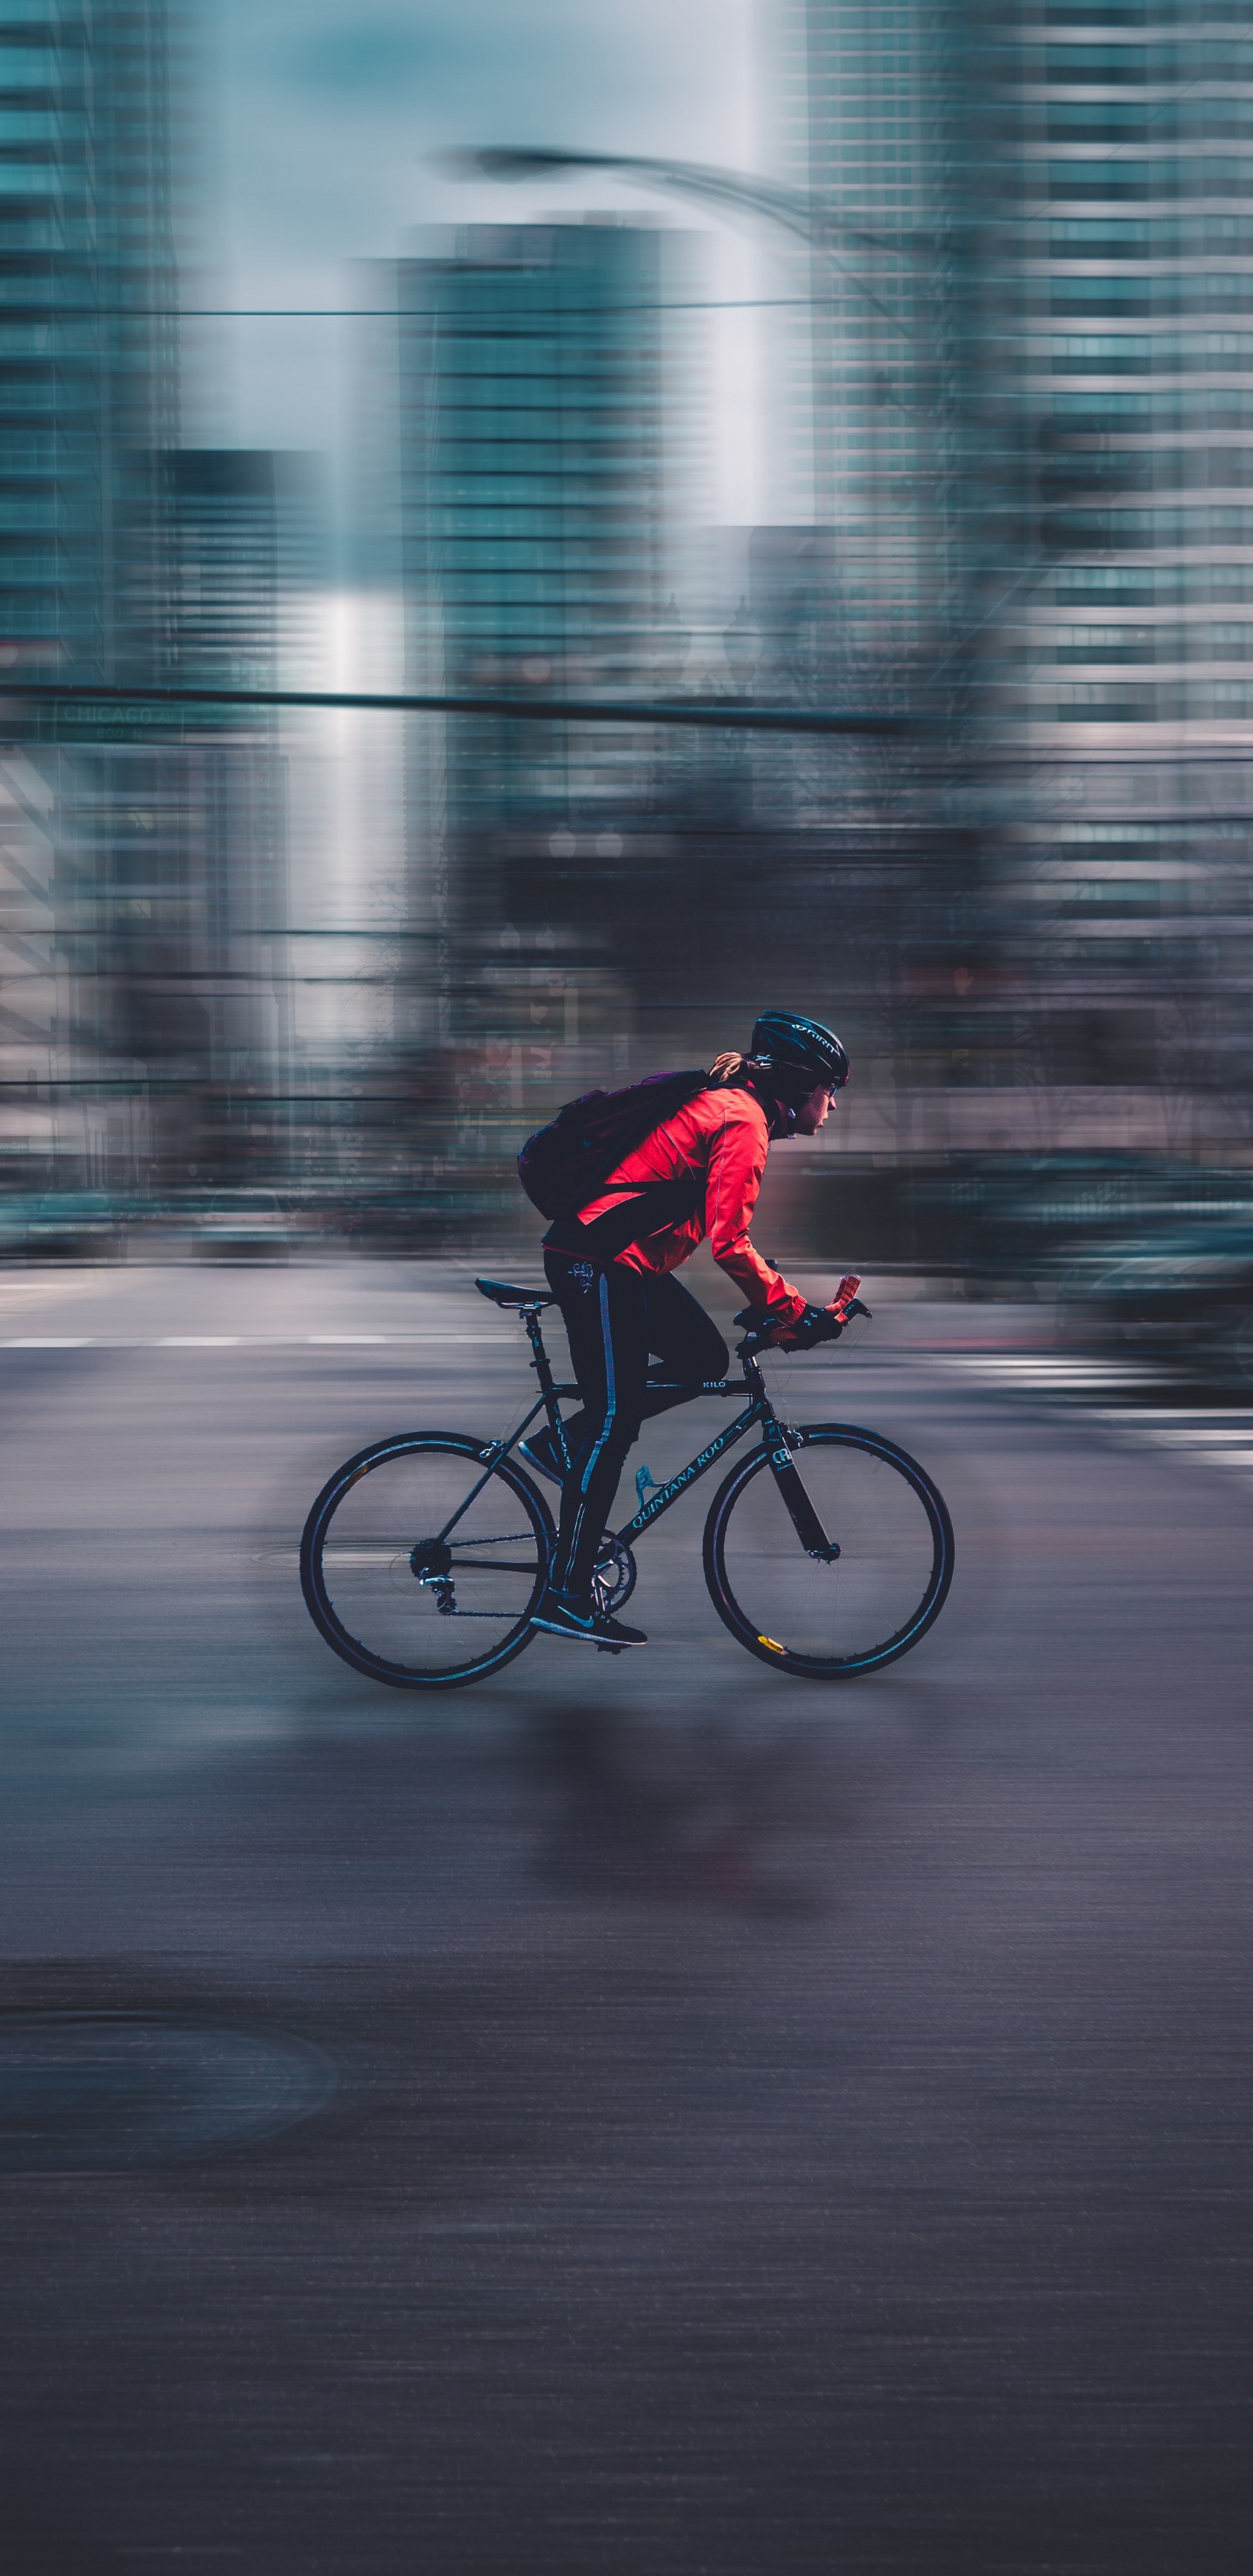 Man in Red Jacket Riding Bicycle Sur Route Pendant la Journée. Wallpaper in 1440x2960 Resolution